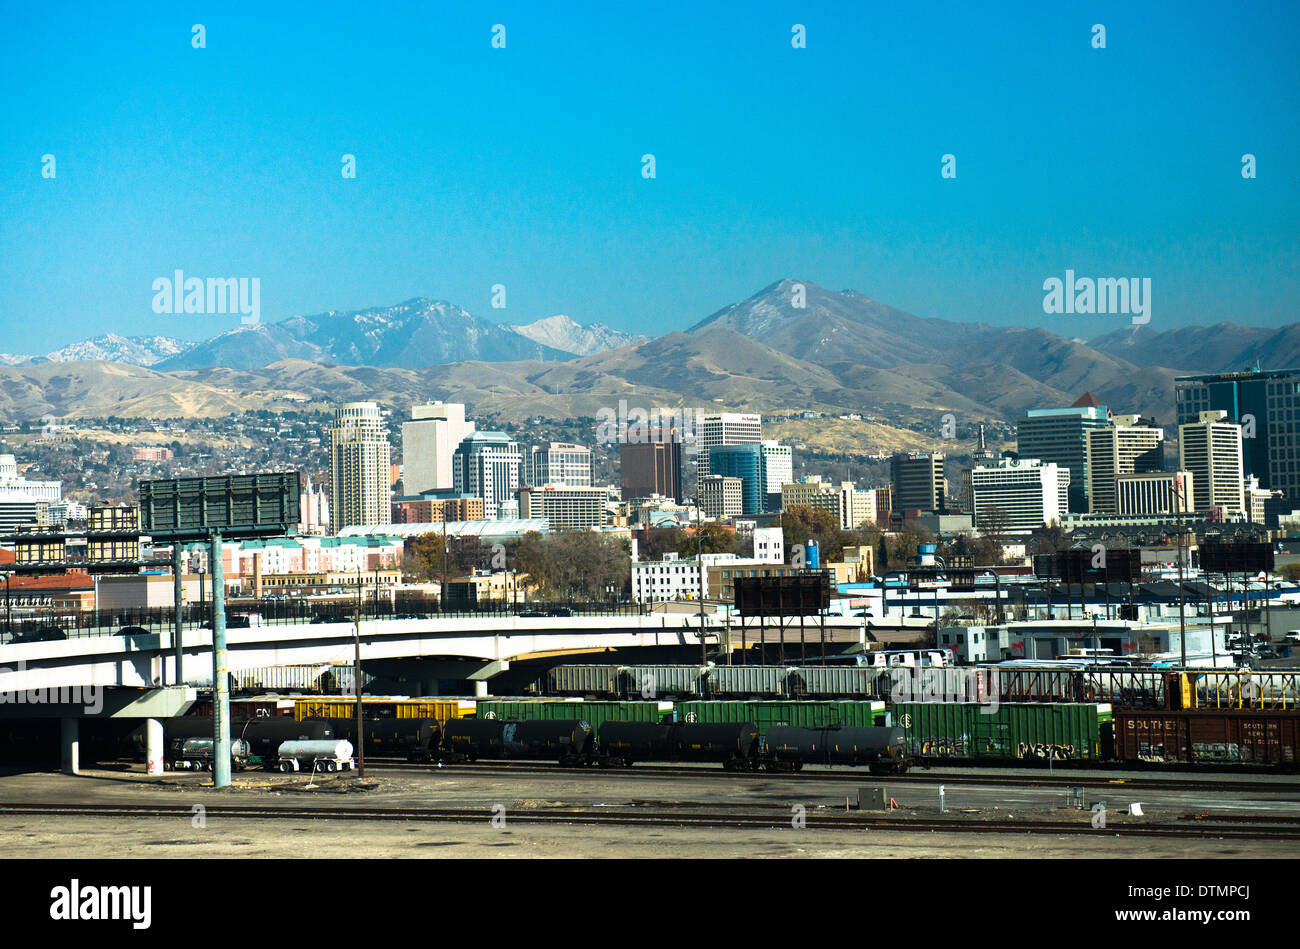 A view of Salt Lake City and the mountains behind the city. Stock Photo